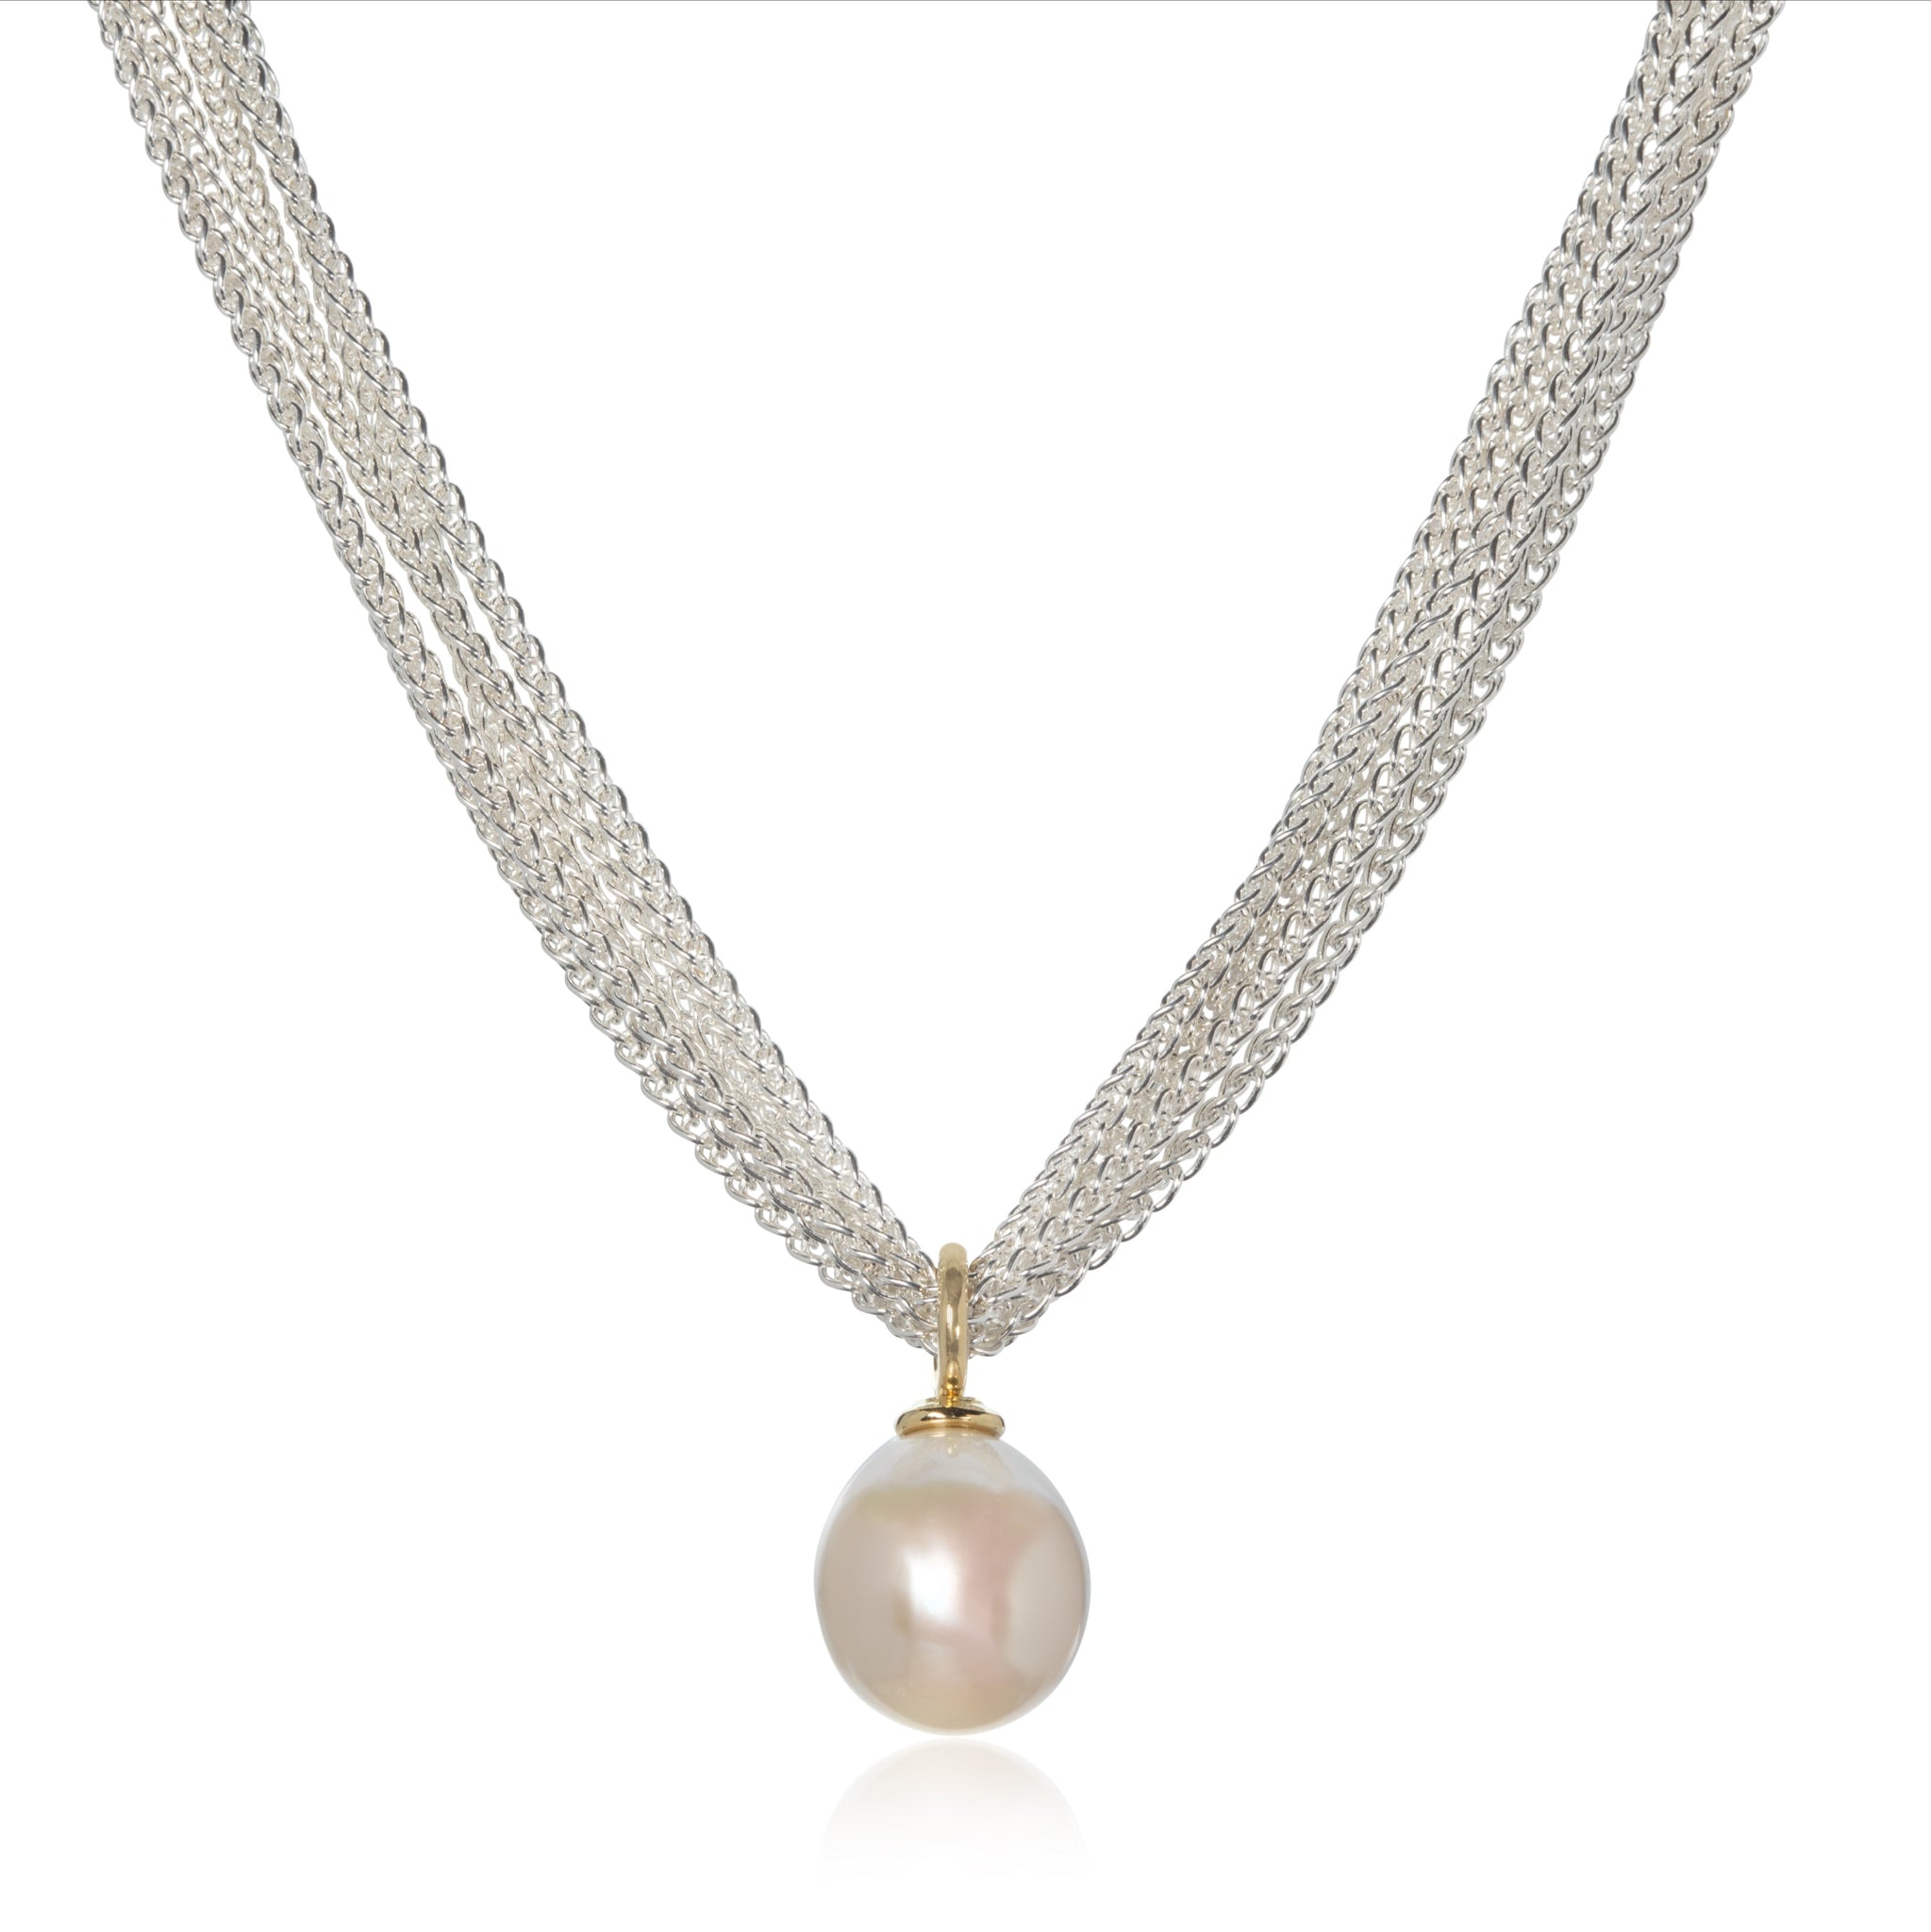 Long 90-100cm Four Strand Pearl And Stainless Steel Chain Necklace